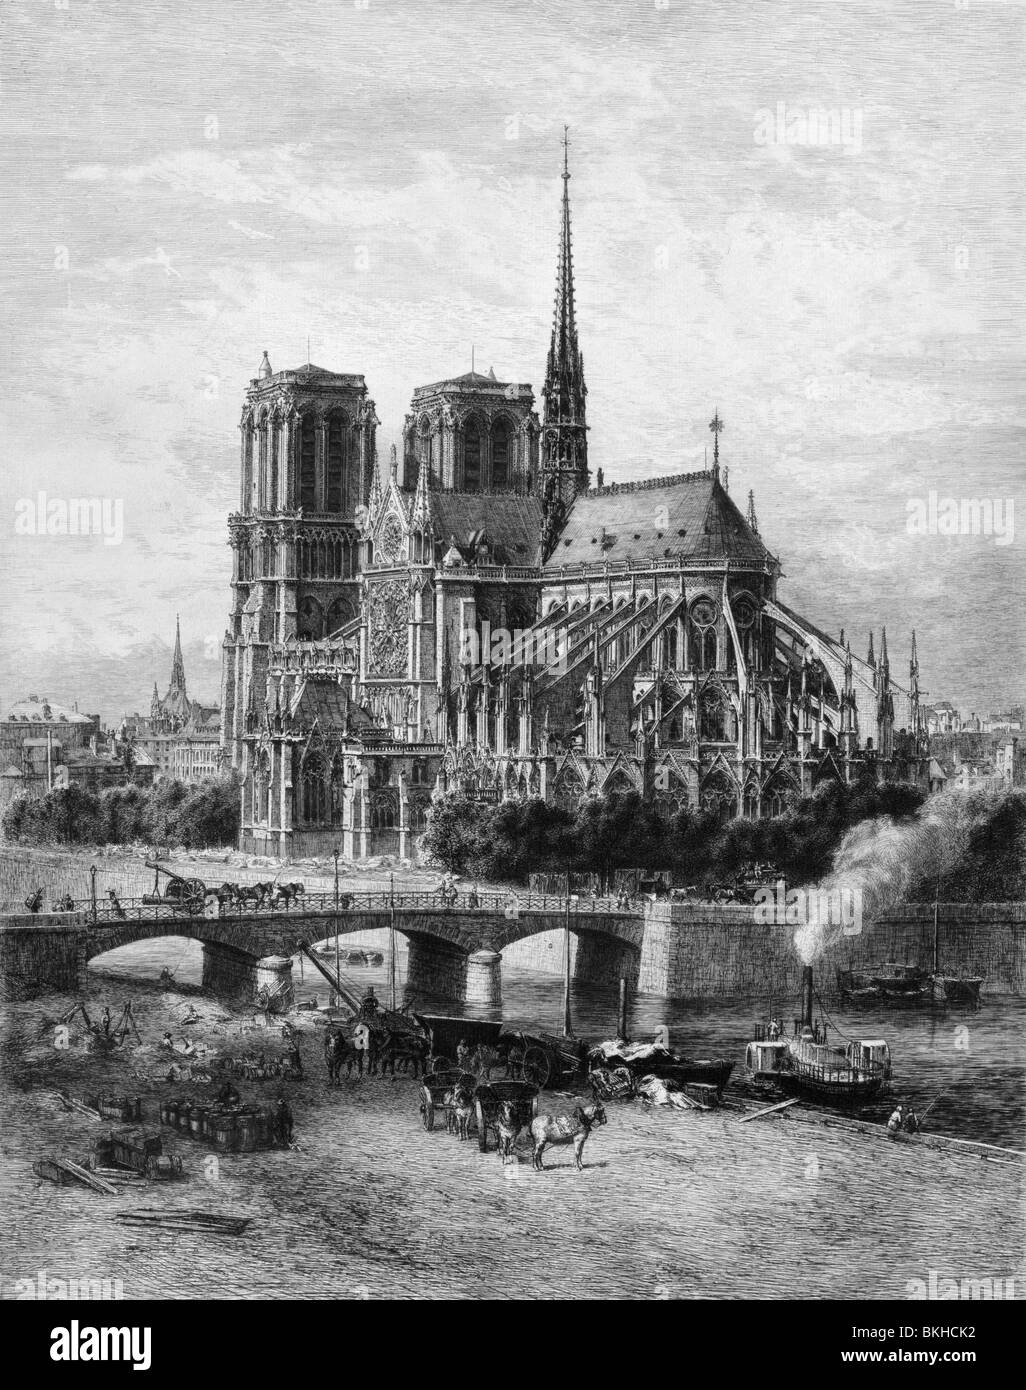 Vintage etching print circa 1870s / 1880s of Notre Dame Cathedral in Paris, France, as it appeared in the late 19th century. Stock Photo